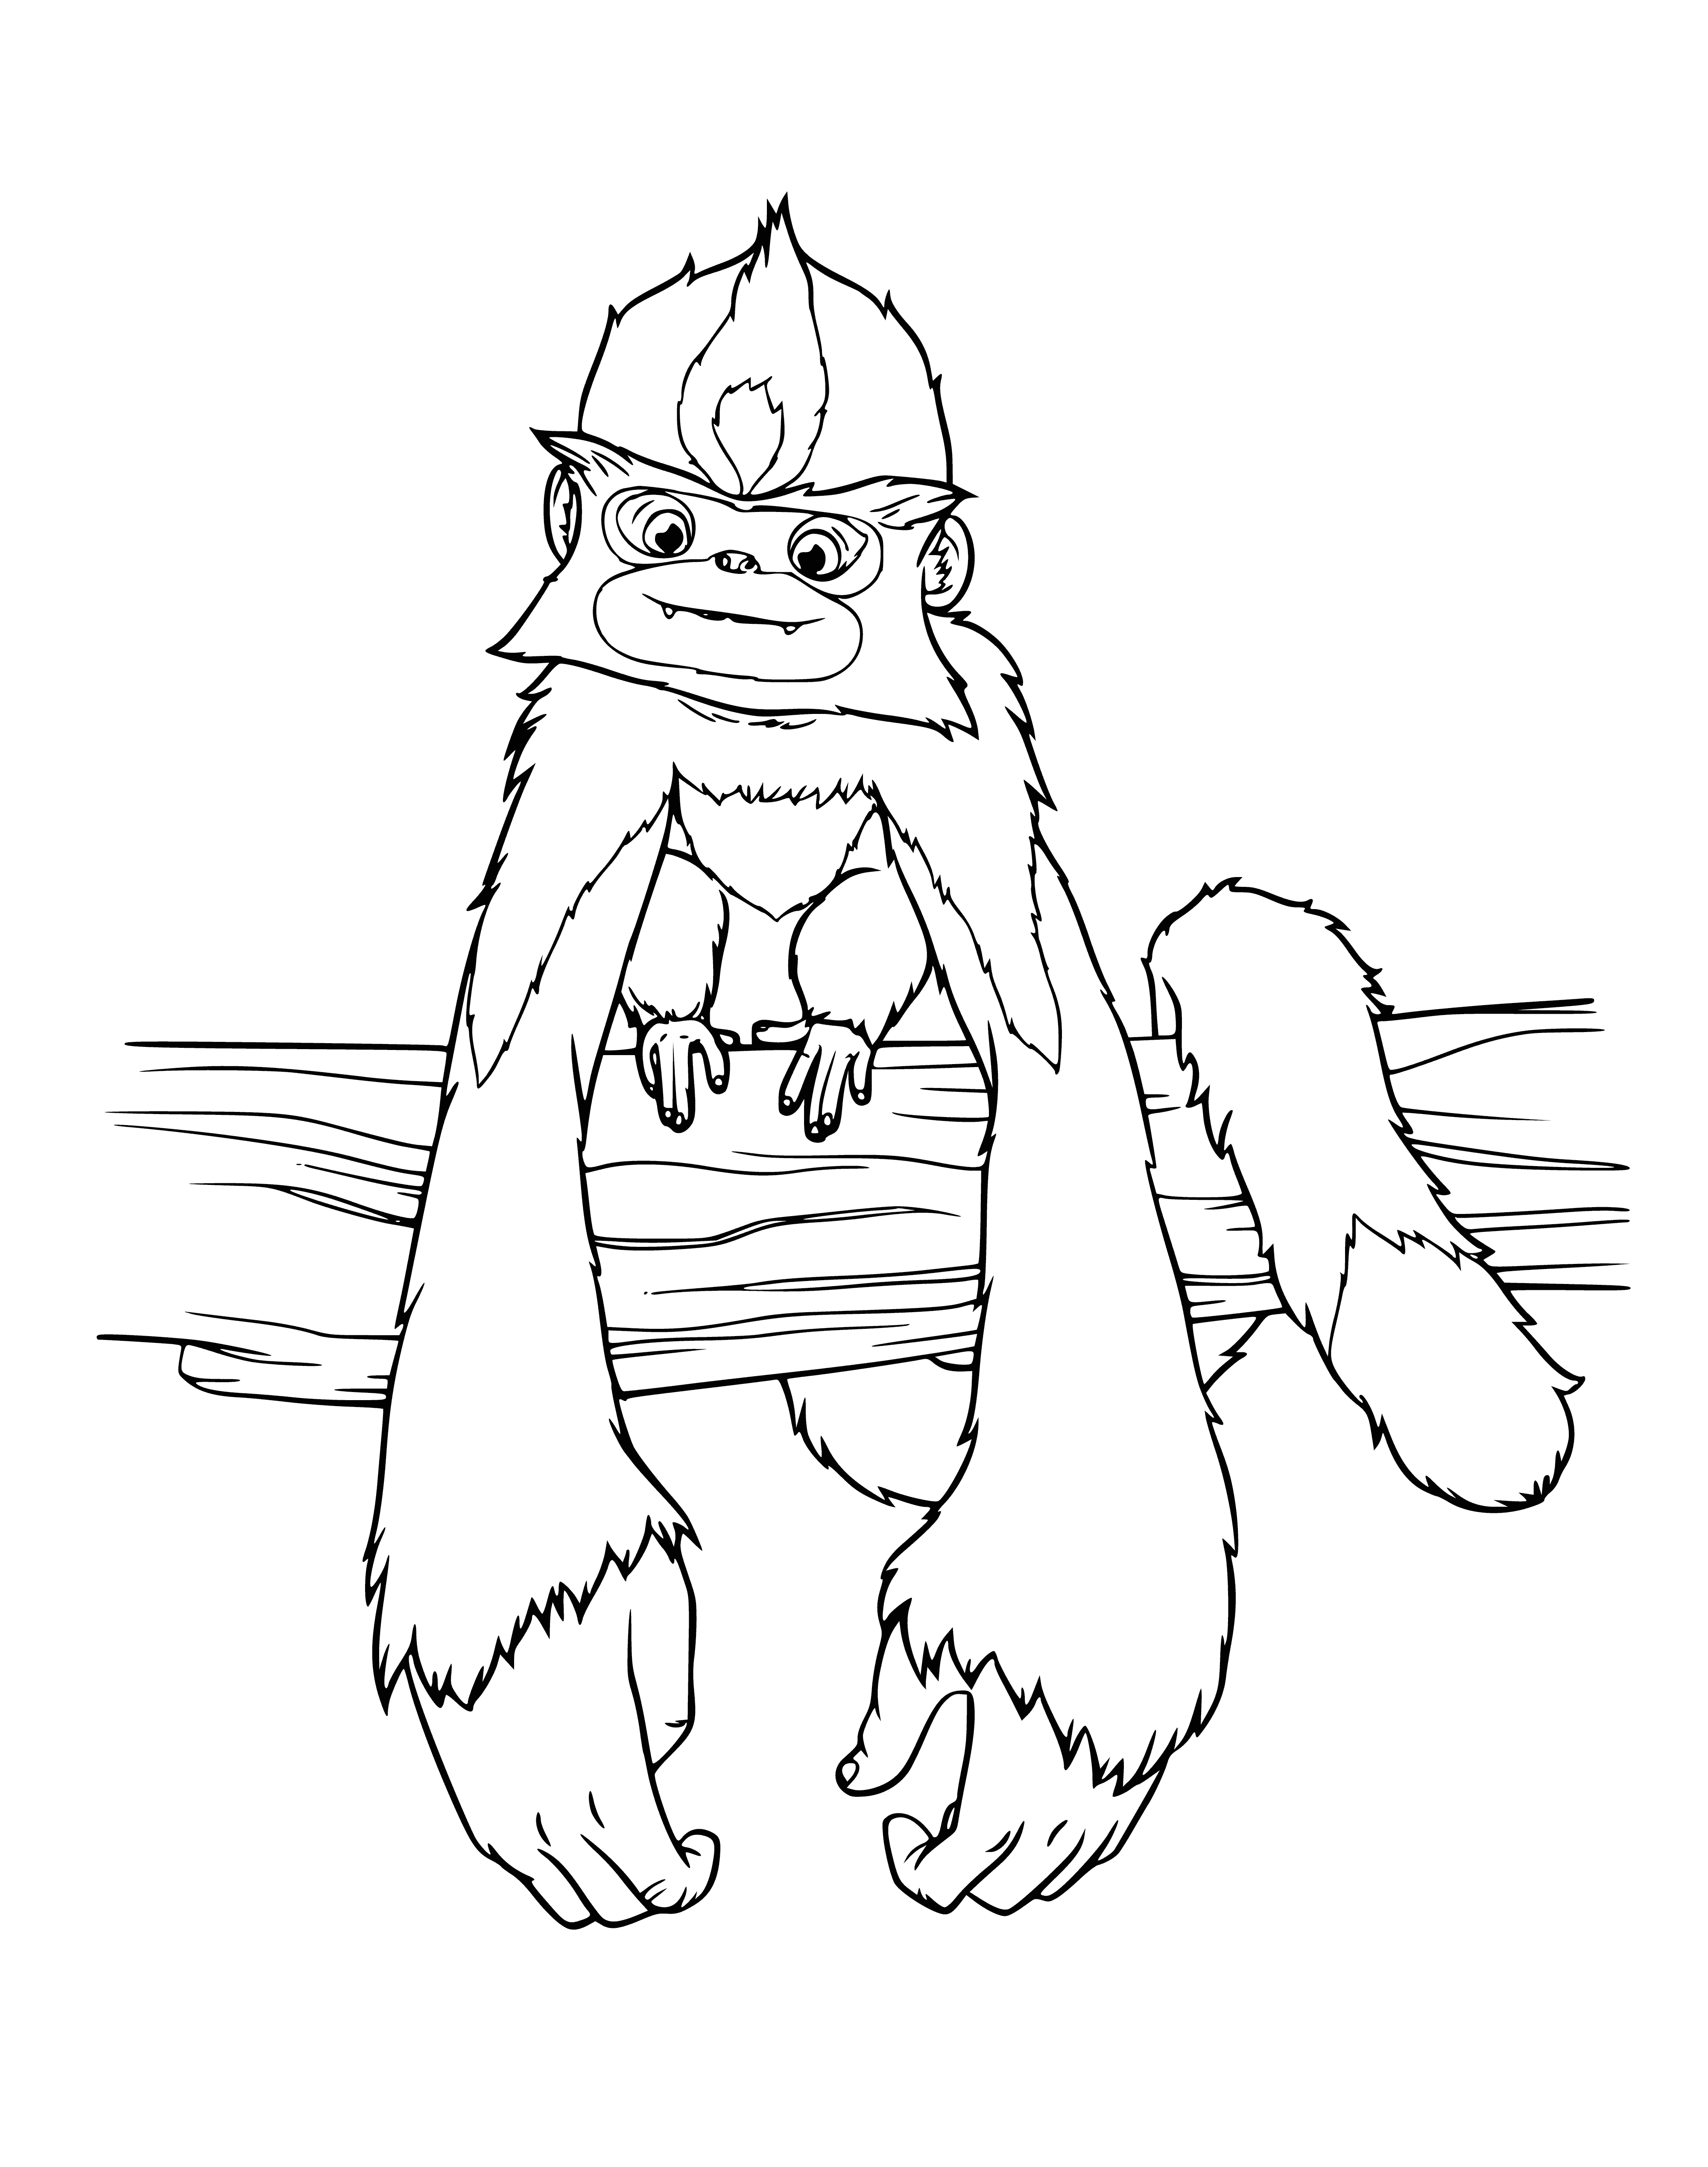 coloring page: Small brown monkey sits atop green rock. Hands clasped together, eyes closed, face to the sun. Enjoying the warmth and peace.